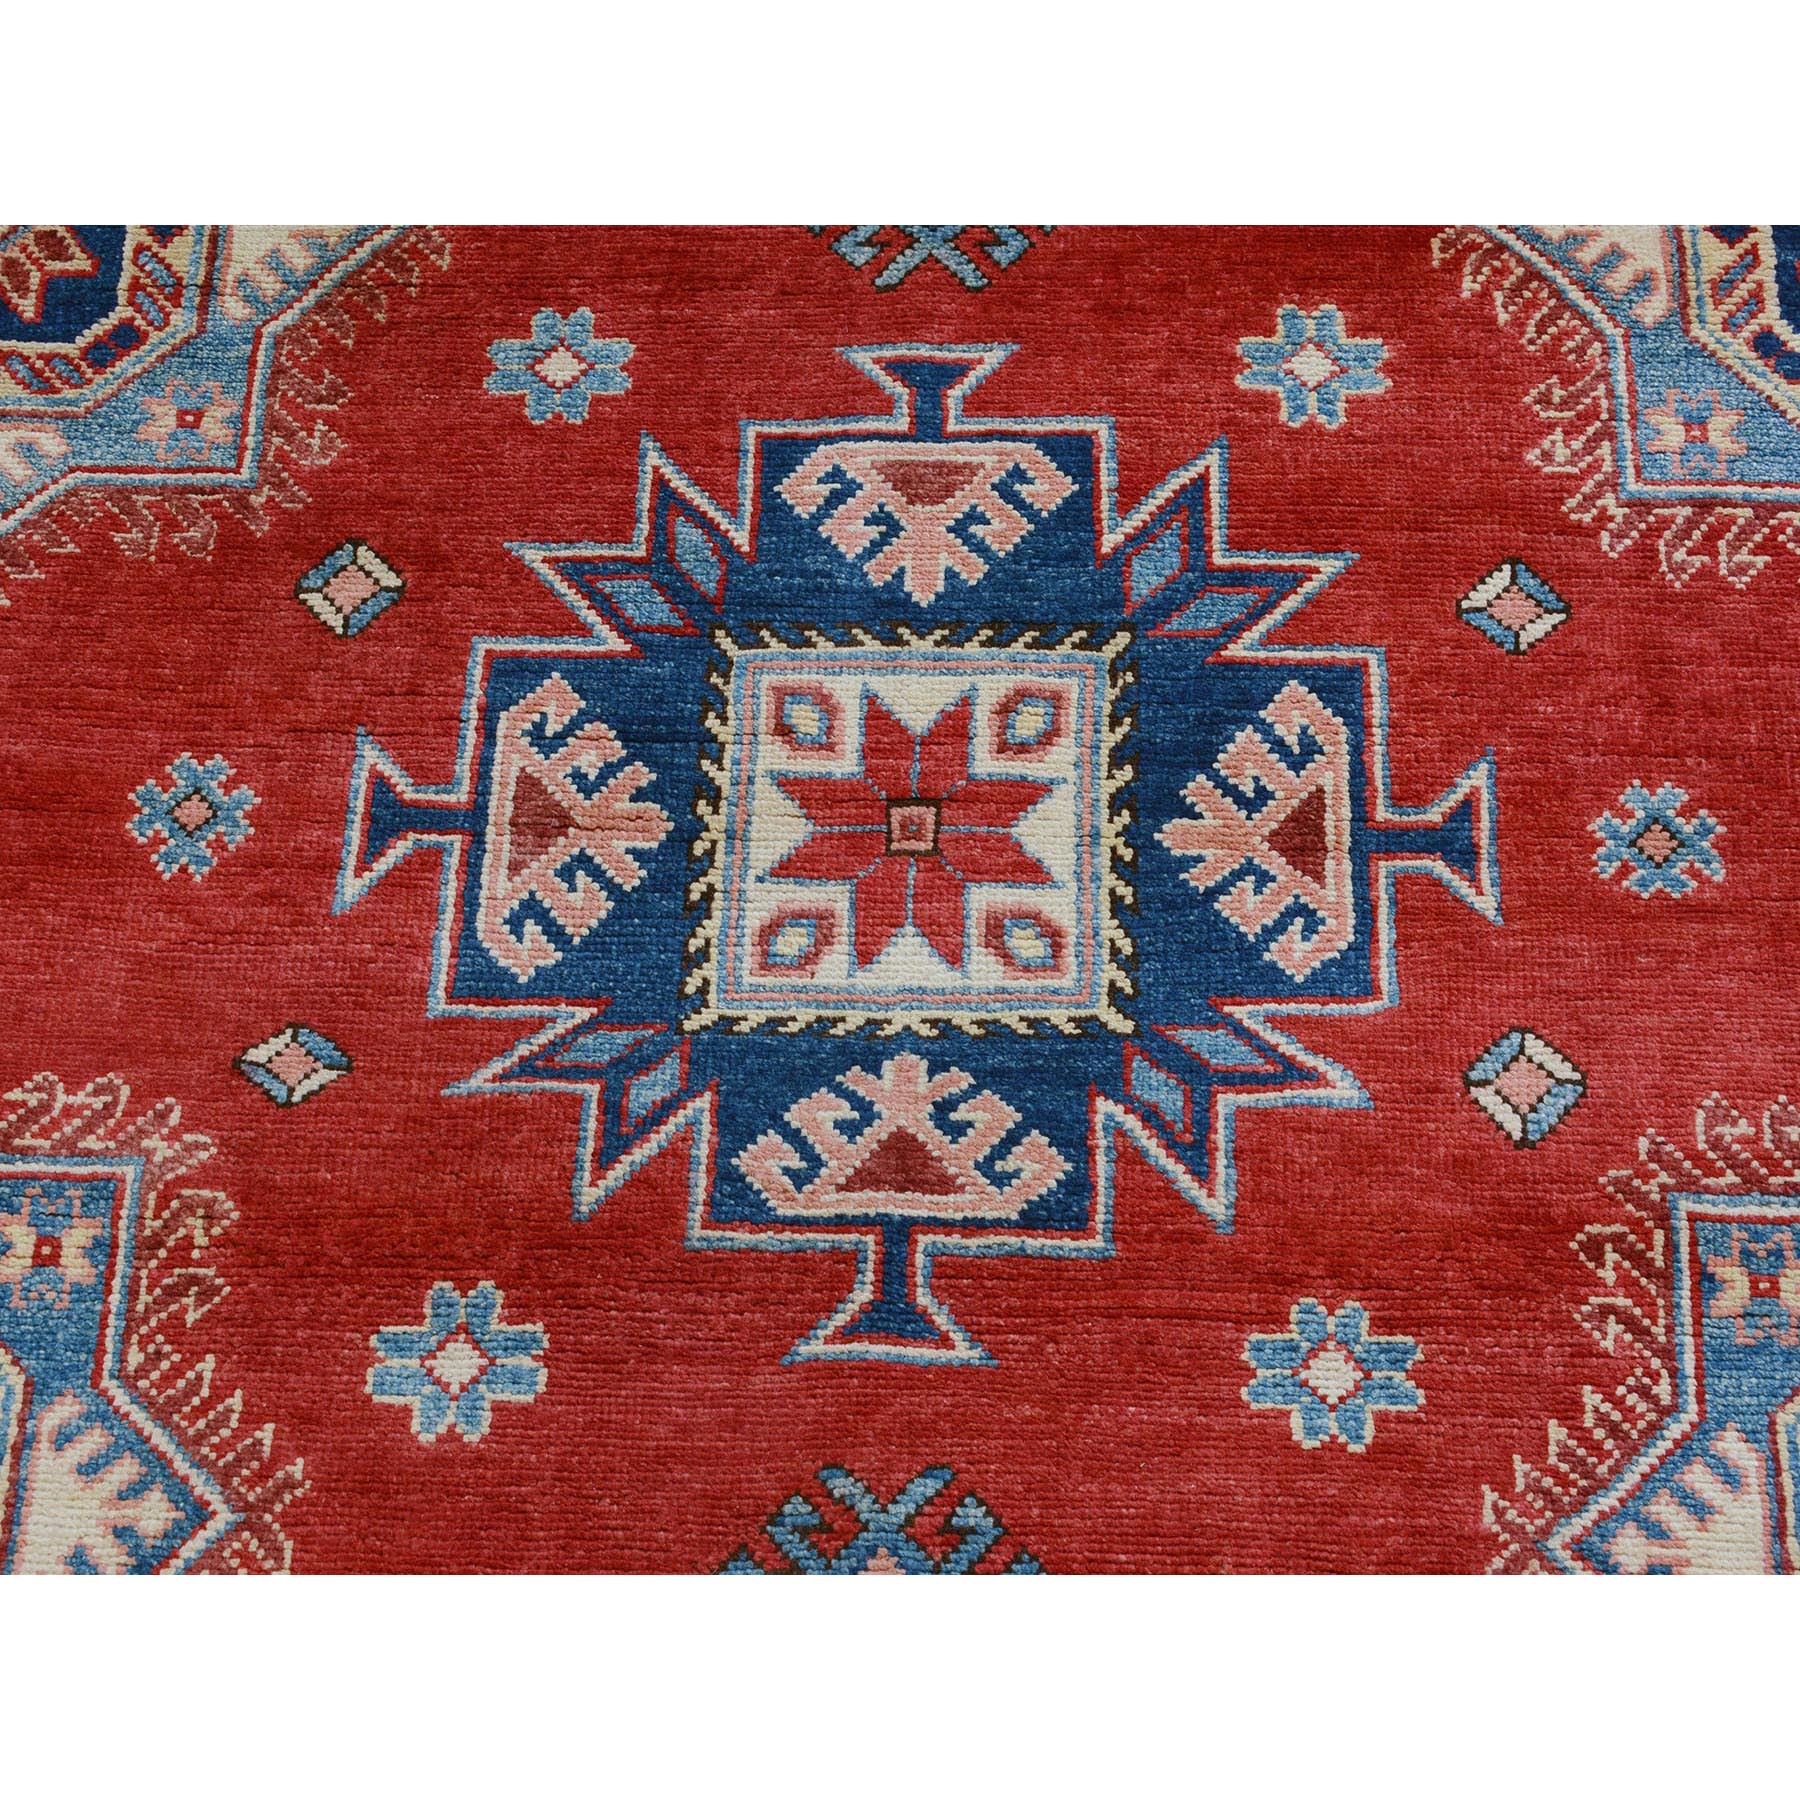 10-x13-6  Red Special Kazak Geometric Design Pure Wool Hand Knotted Oriental Rug 